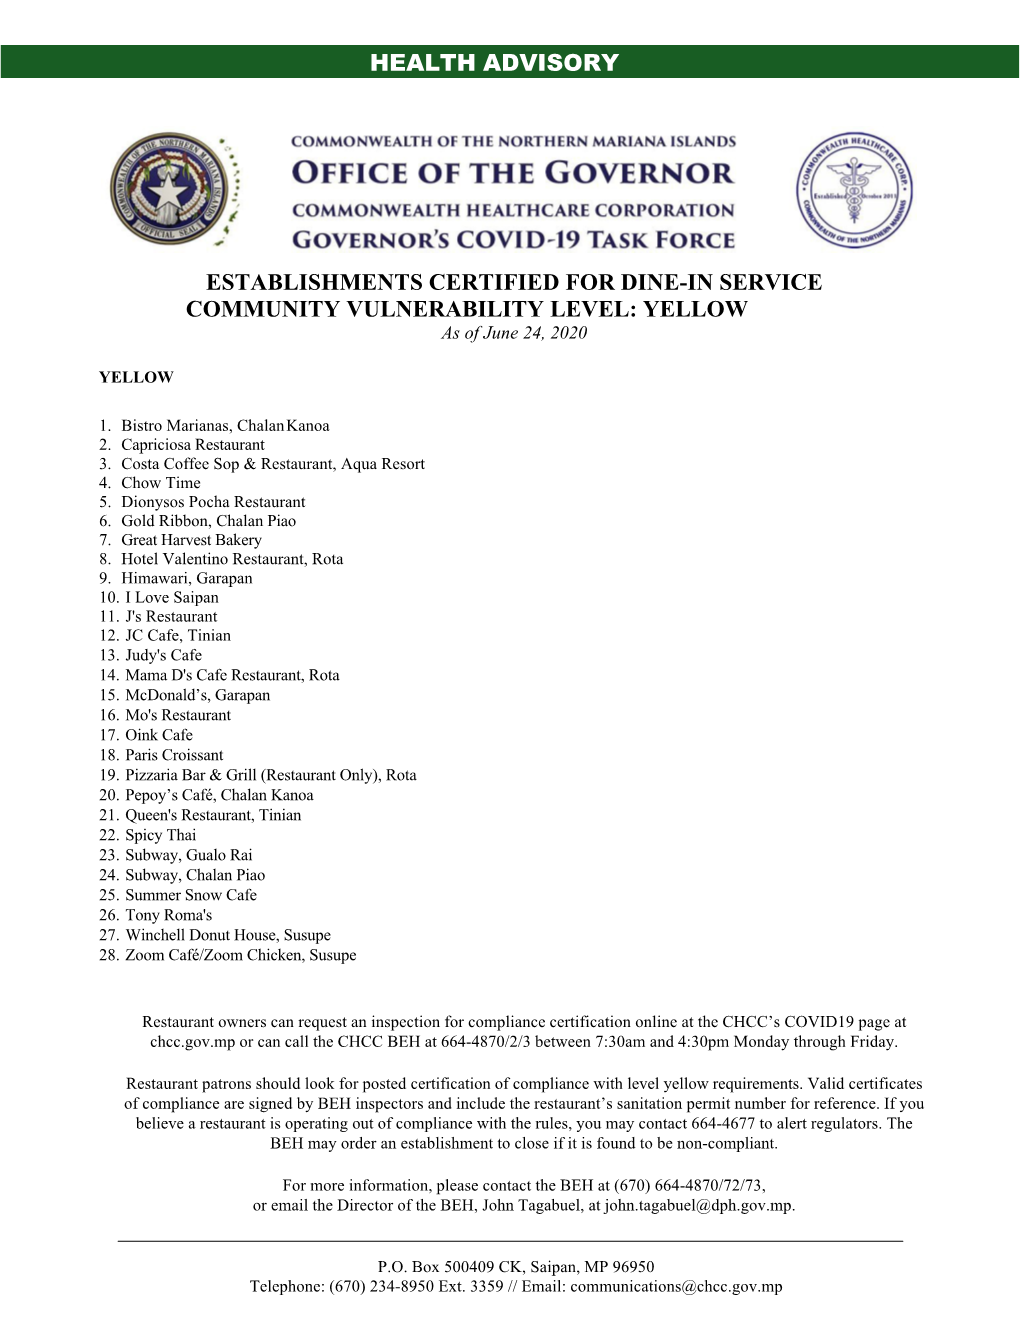 ESTABLISHMENTS CERTIFIED for DINE-IN SERVICE COMMUNITY VULNERABILITY LEVEL: YELLOW As of June 24, 2020